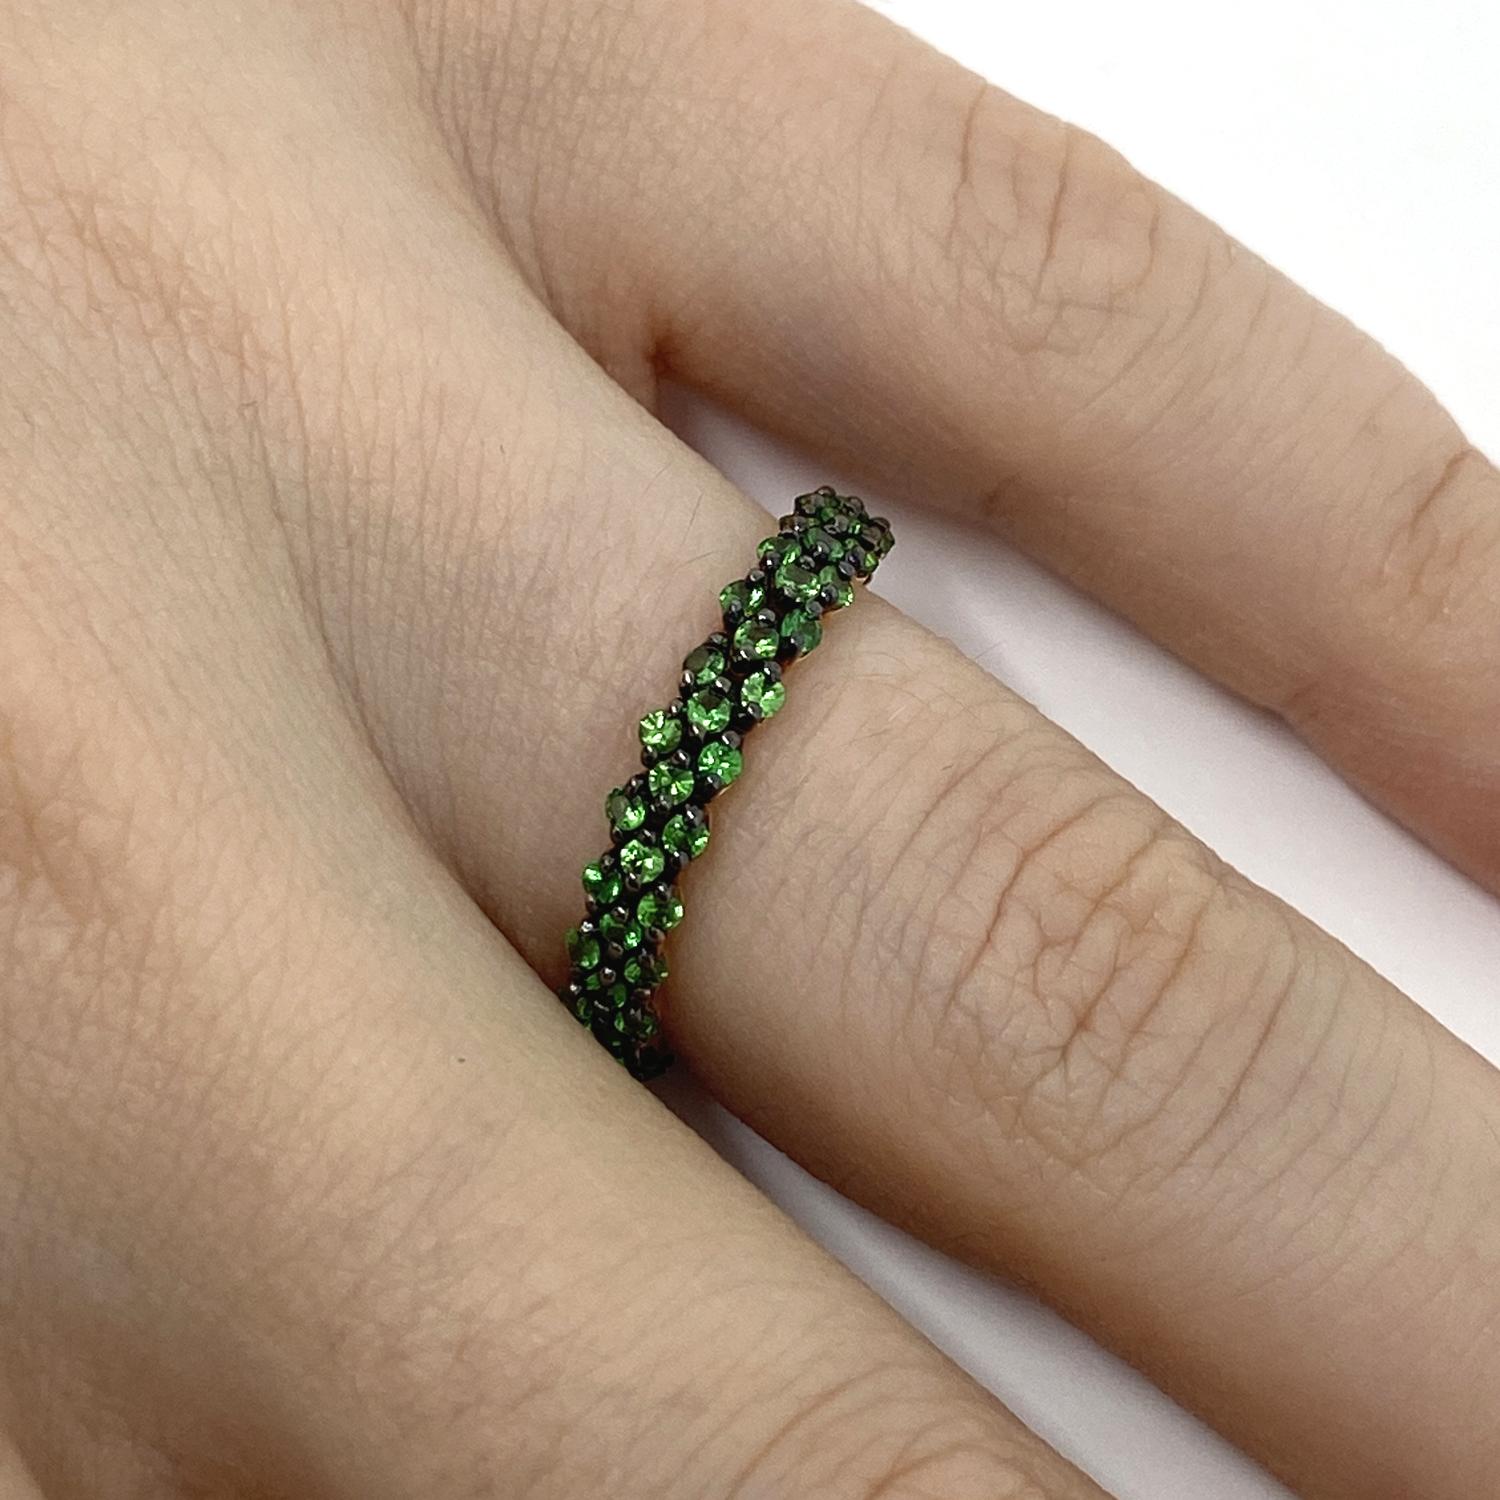 All-round riviere ring made of 18 kt rose gold with natural tsavorite for ct.1.33

Welcome to our jewelry collection, where every piece tells a story of timeless elegance and unparalleled craftsmanship. As a family-run business in Italy for over 100